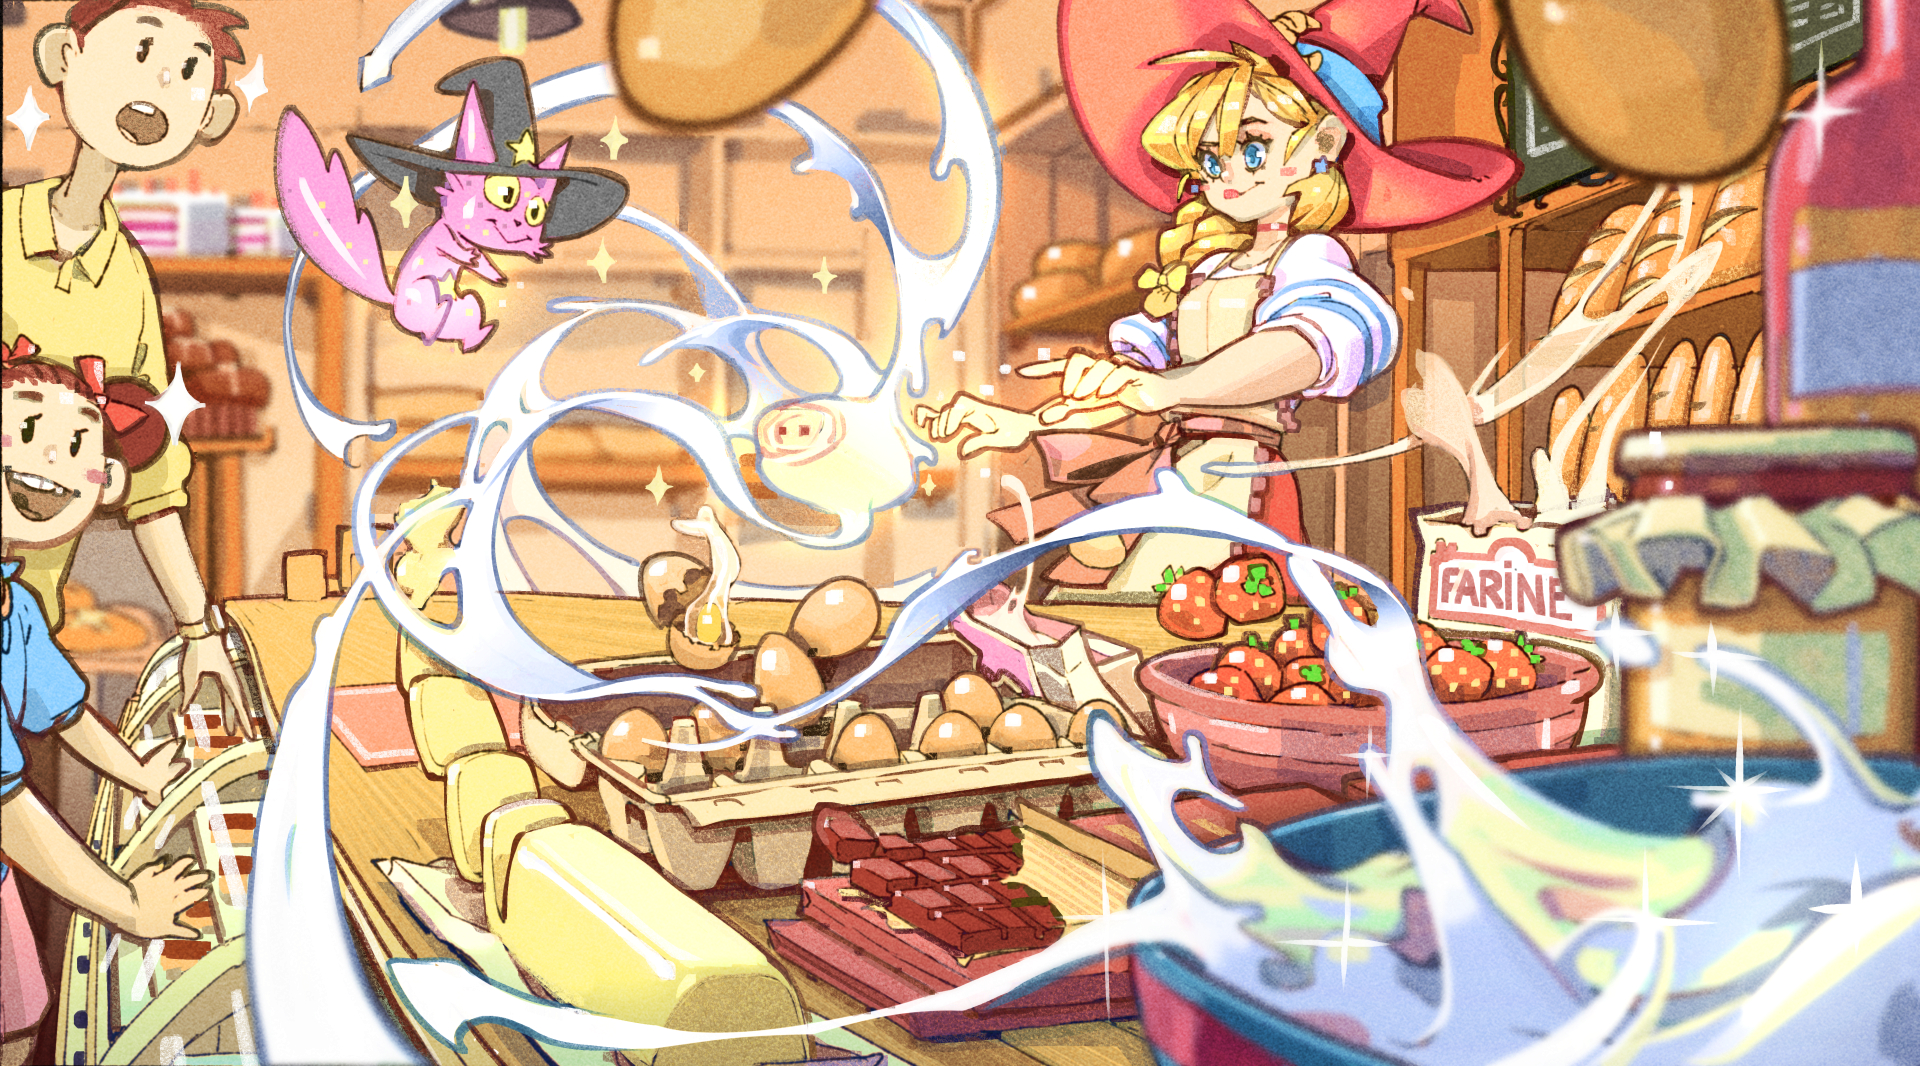 Lunne baking her magical bread